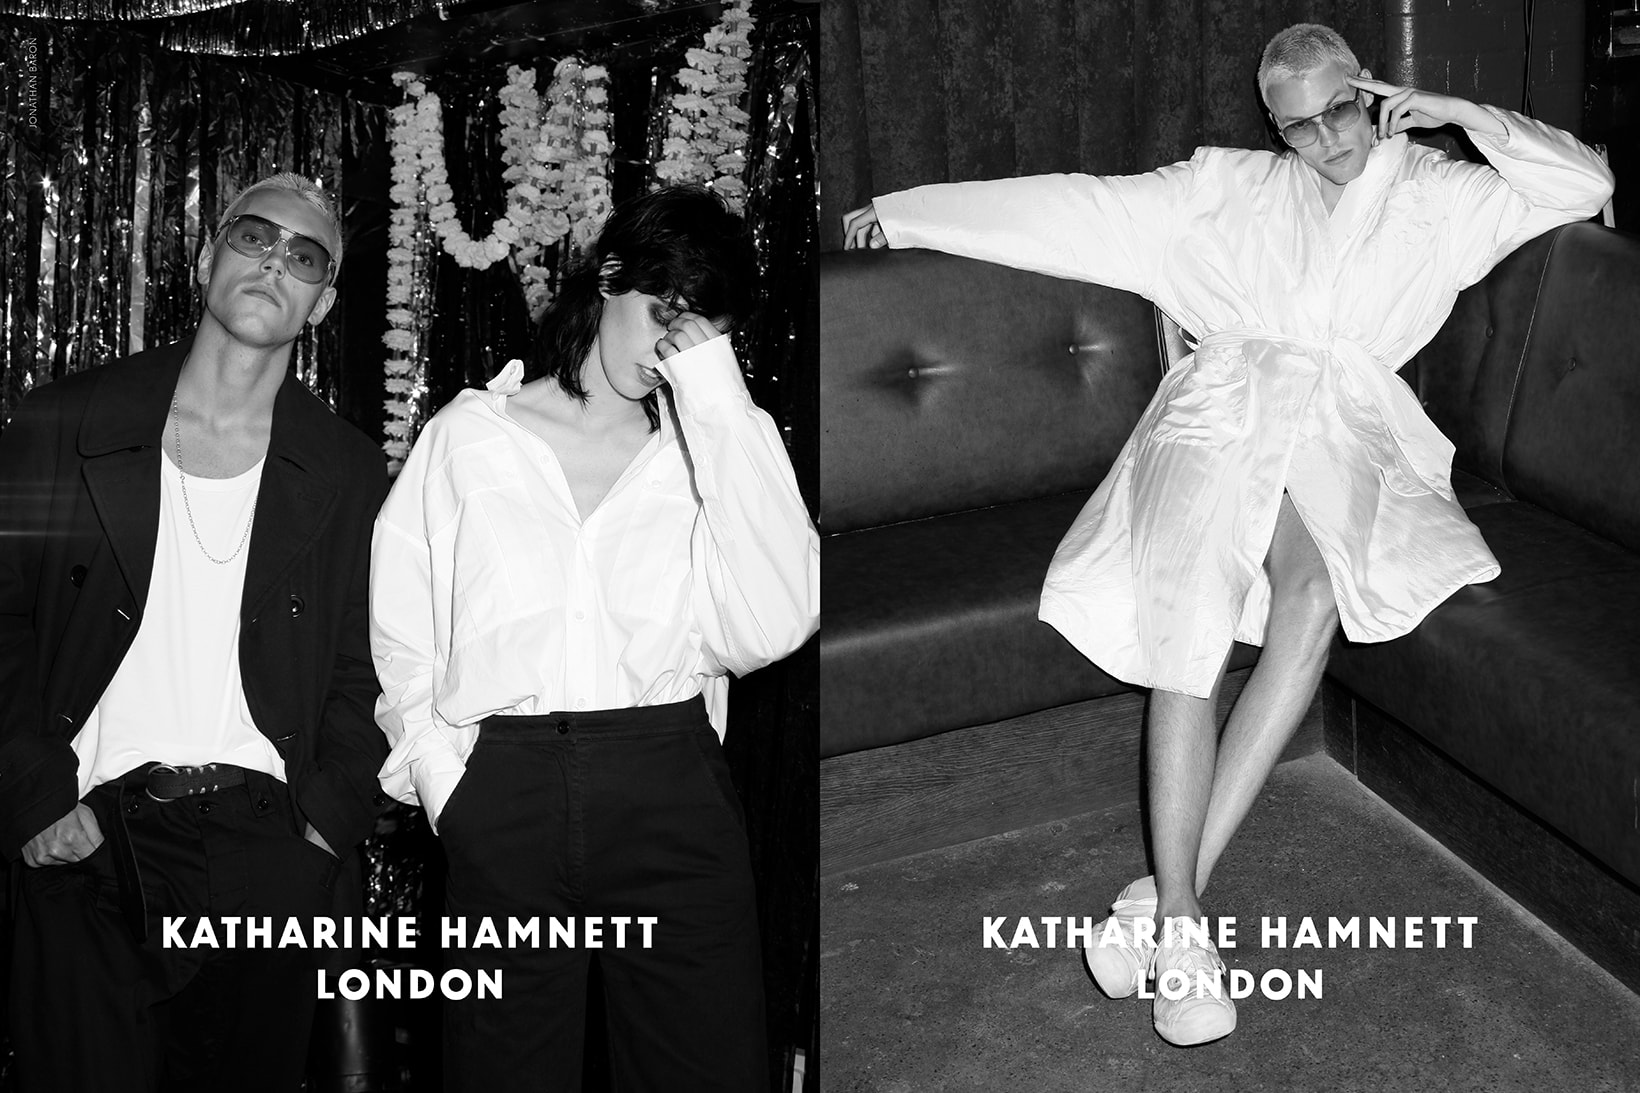 Katharine Hamnett Fall/Winter 2017 Menswear Interview Relaunch t-shirts tees kanye west clothing style fashion designer typography slogan 58% DON'T WANT PERSHING Margaret Thatcher